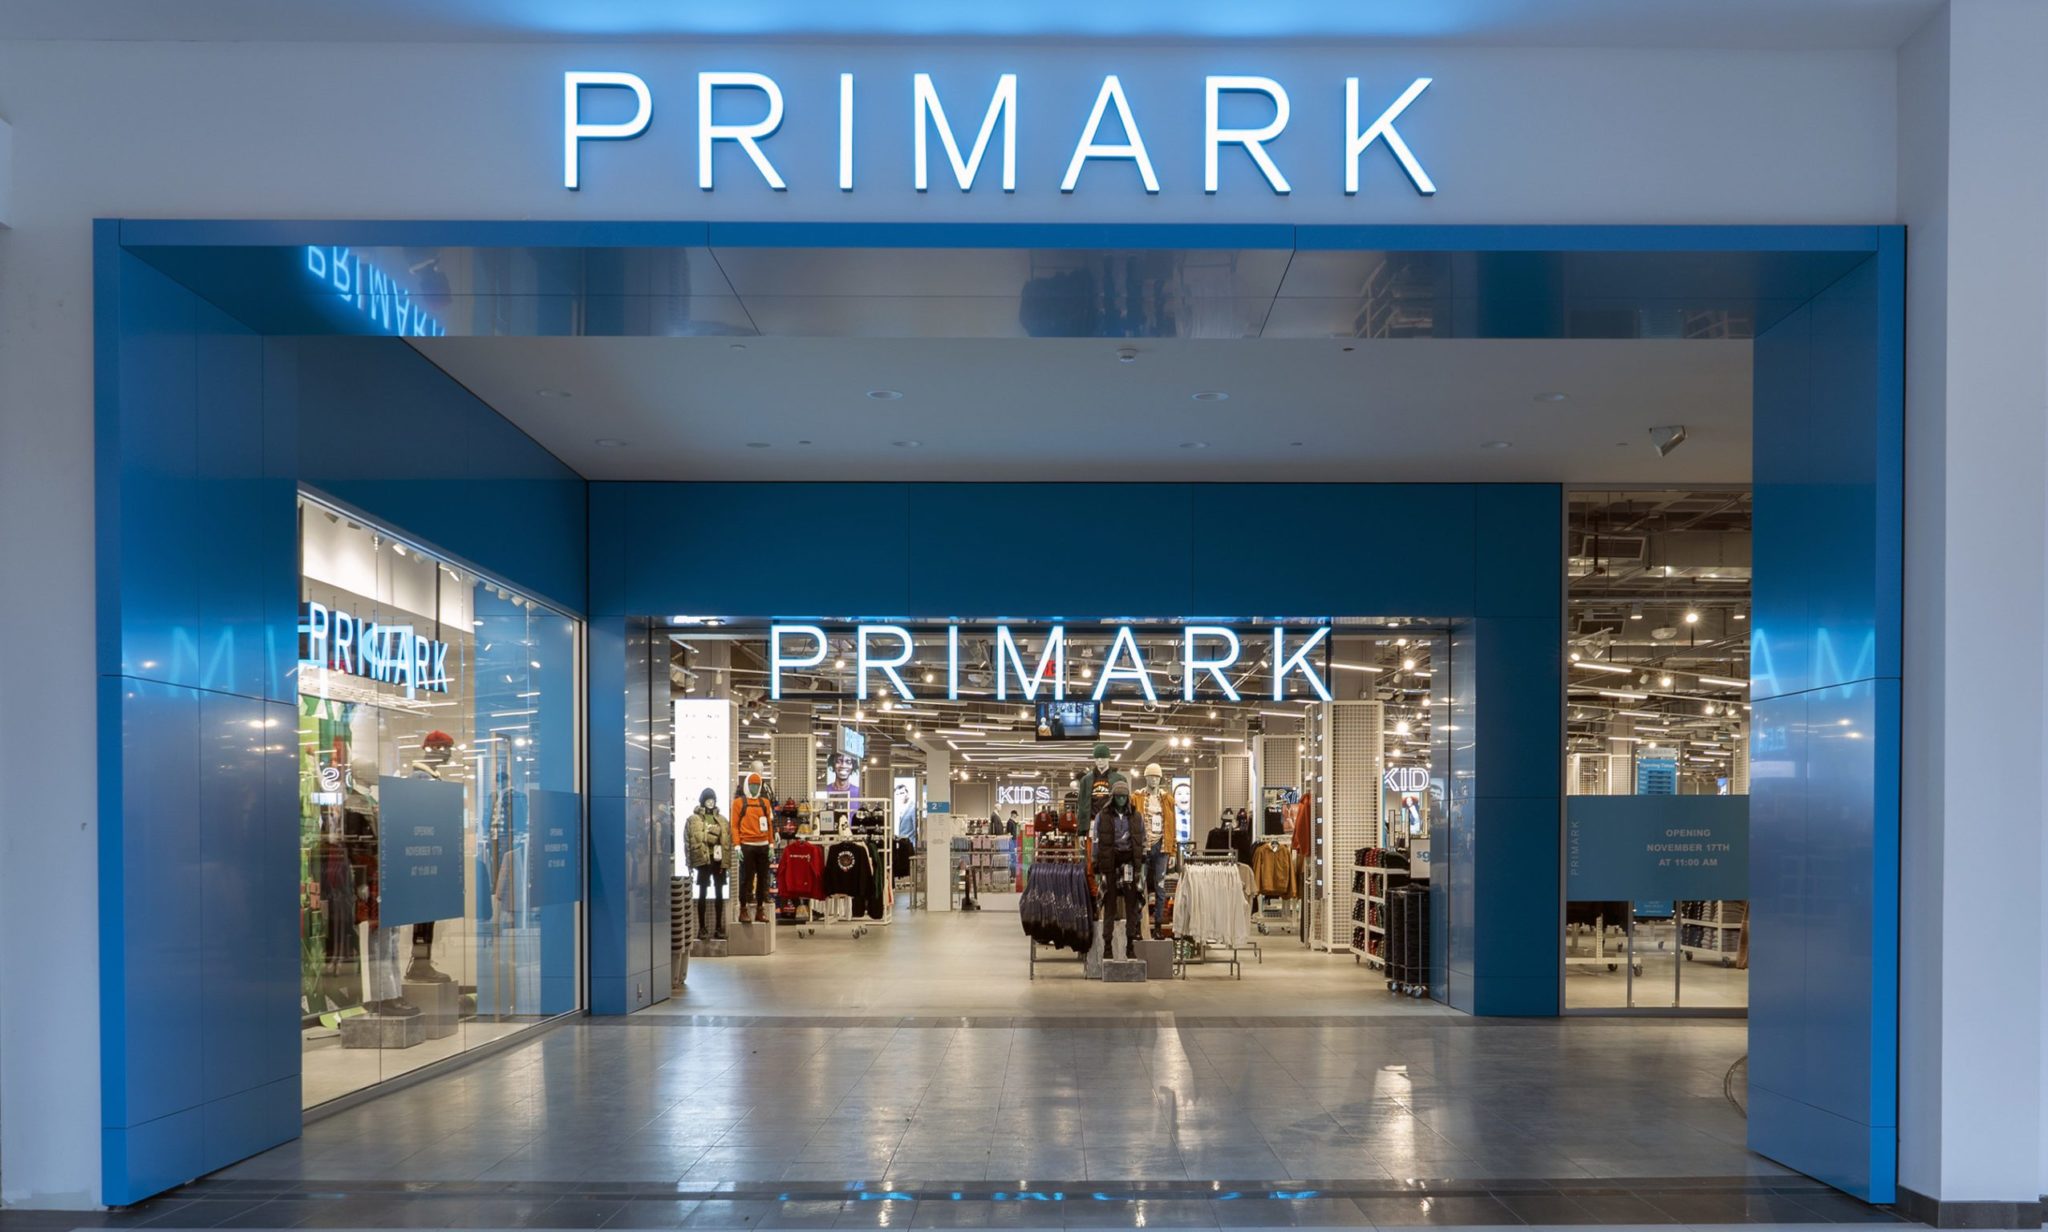 Primark trials ‘sold’ stickers as anti-theft deterrent | Retail Sector